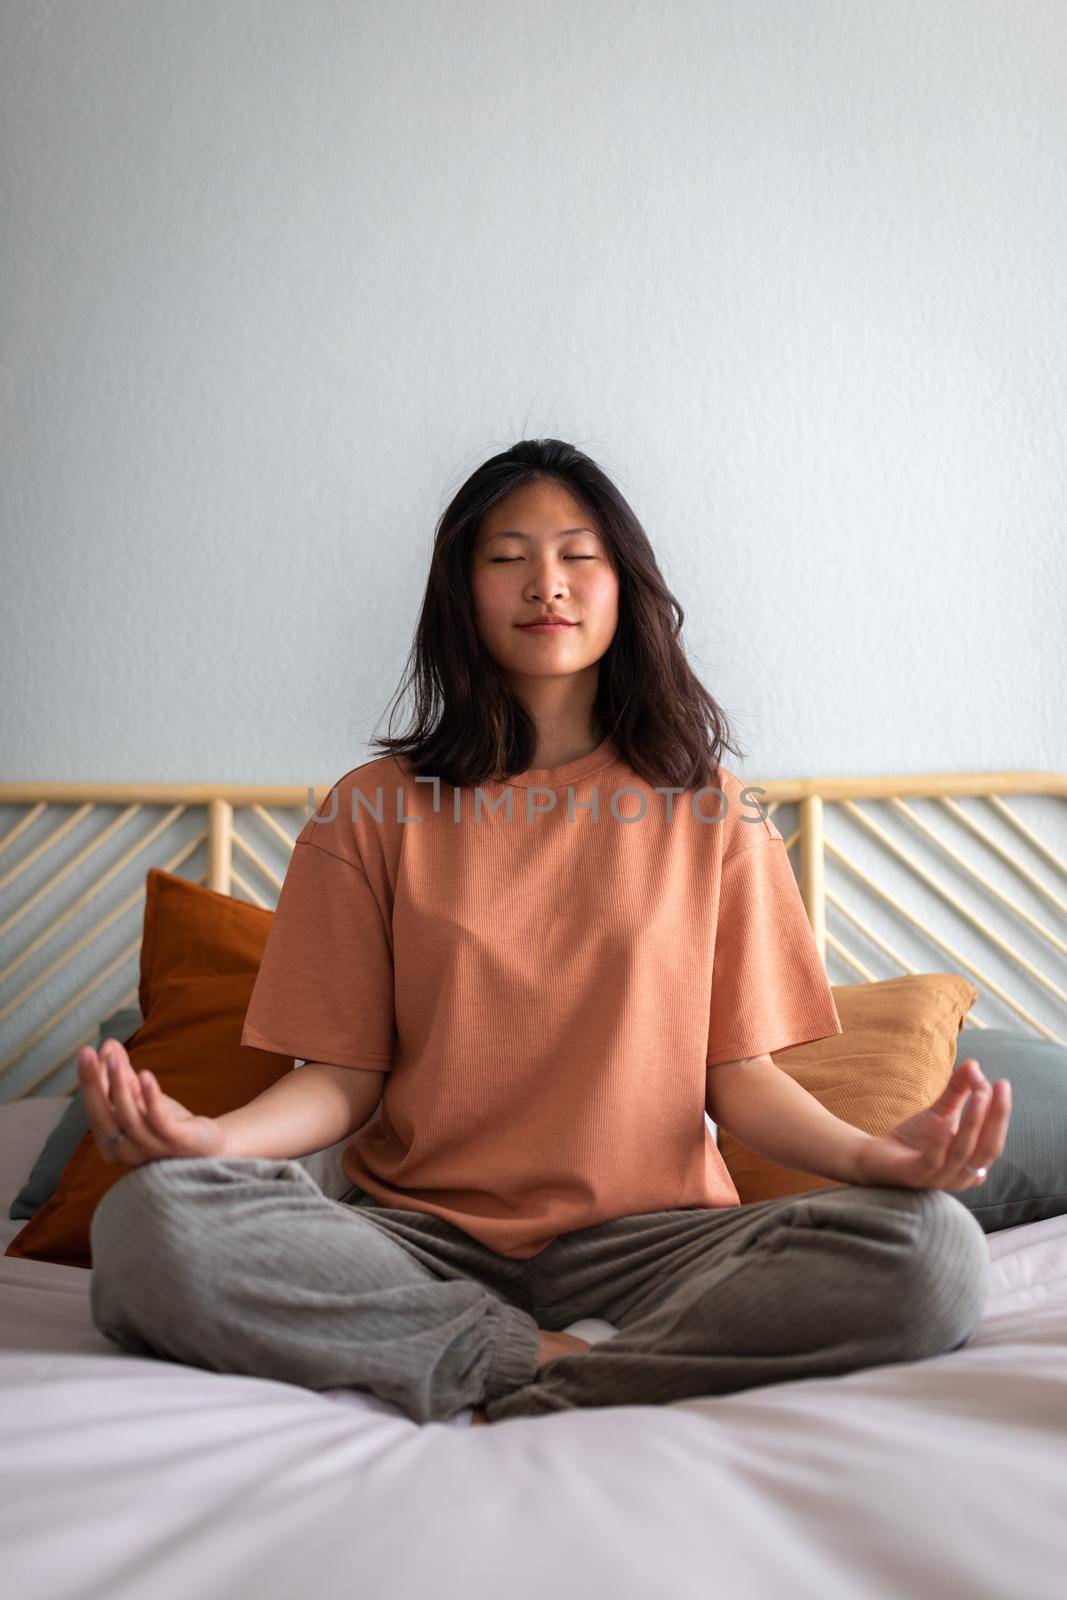 Front view of college student woman meditating and doing breathing exercises on bed in the morning. Vertical by Hoverstock